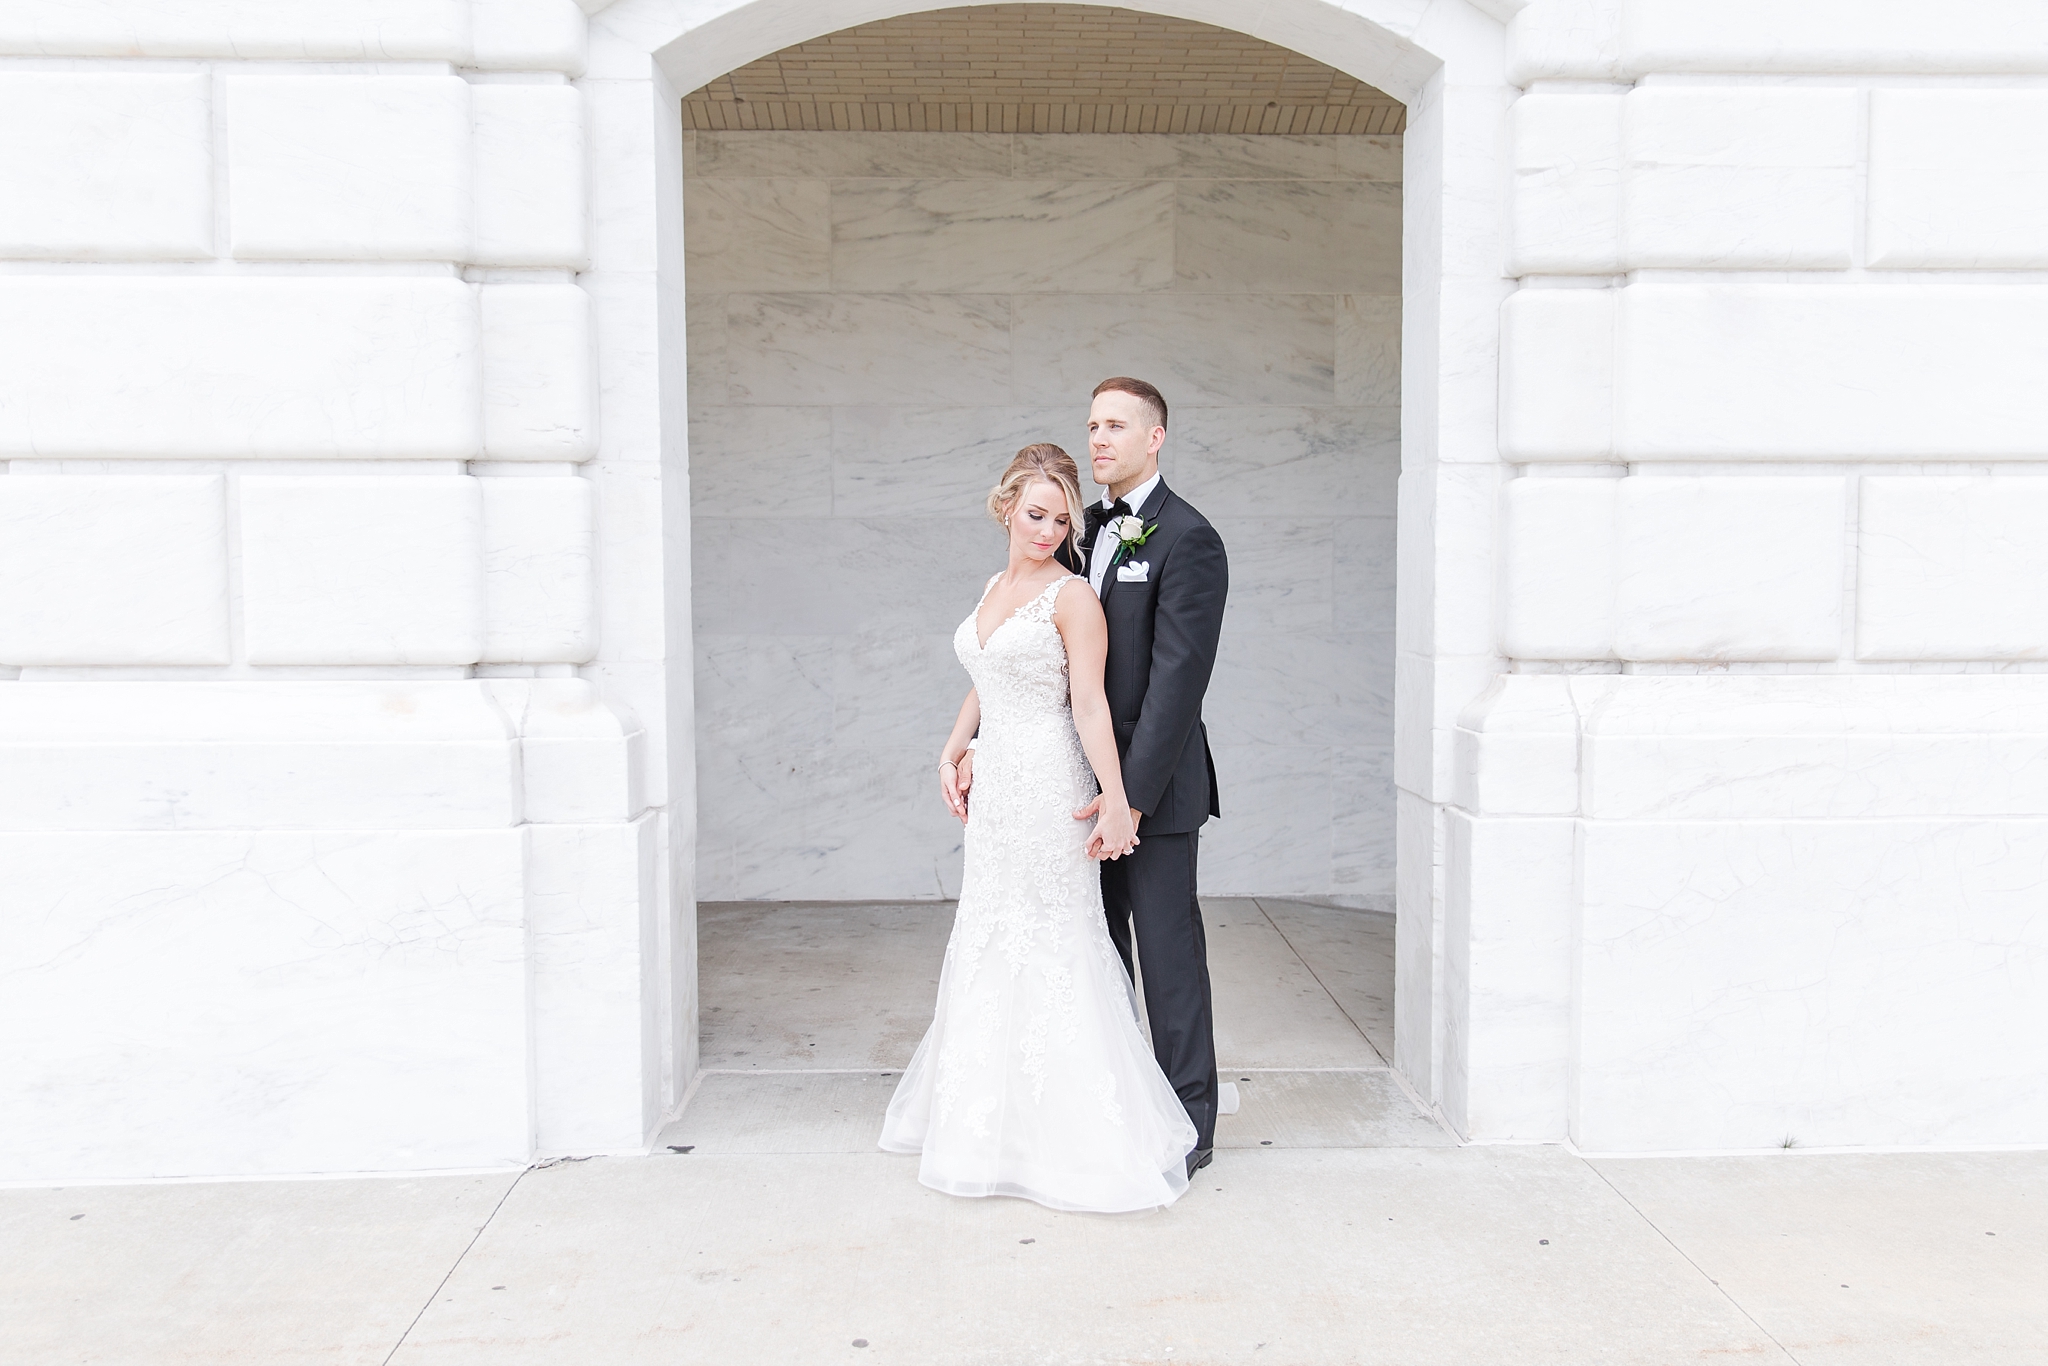 candid-romantic-wedding-photos-at-the-masonic-temple-belle-isle-detroit-institute-of-arts-in-detroit-michigan-by-courtney-carolyn-photography_0058.jpg